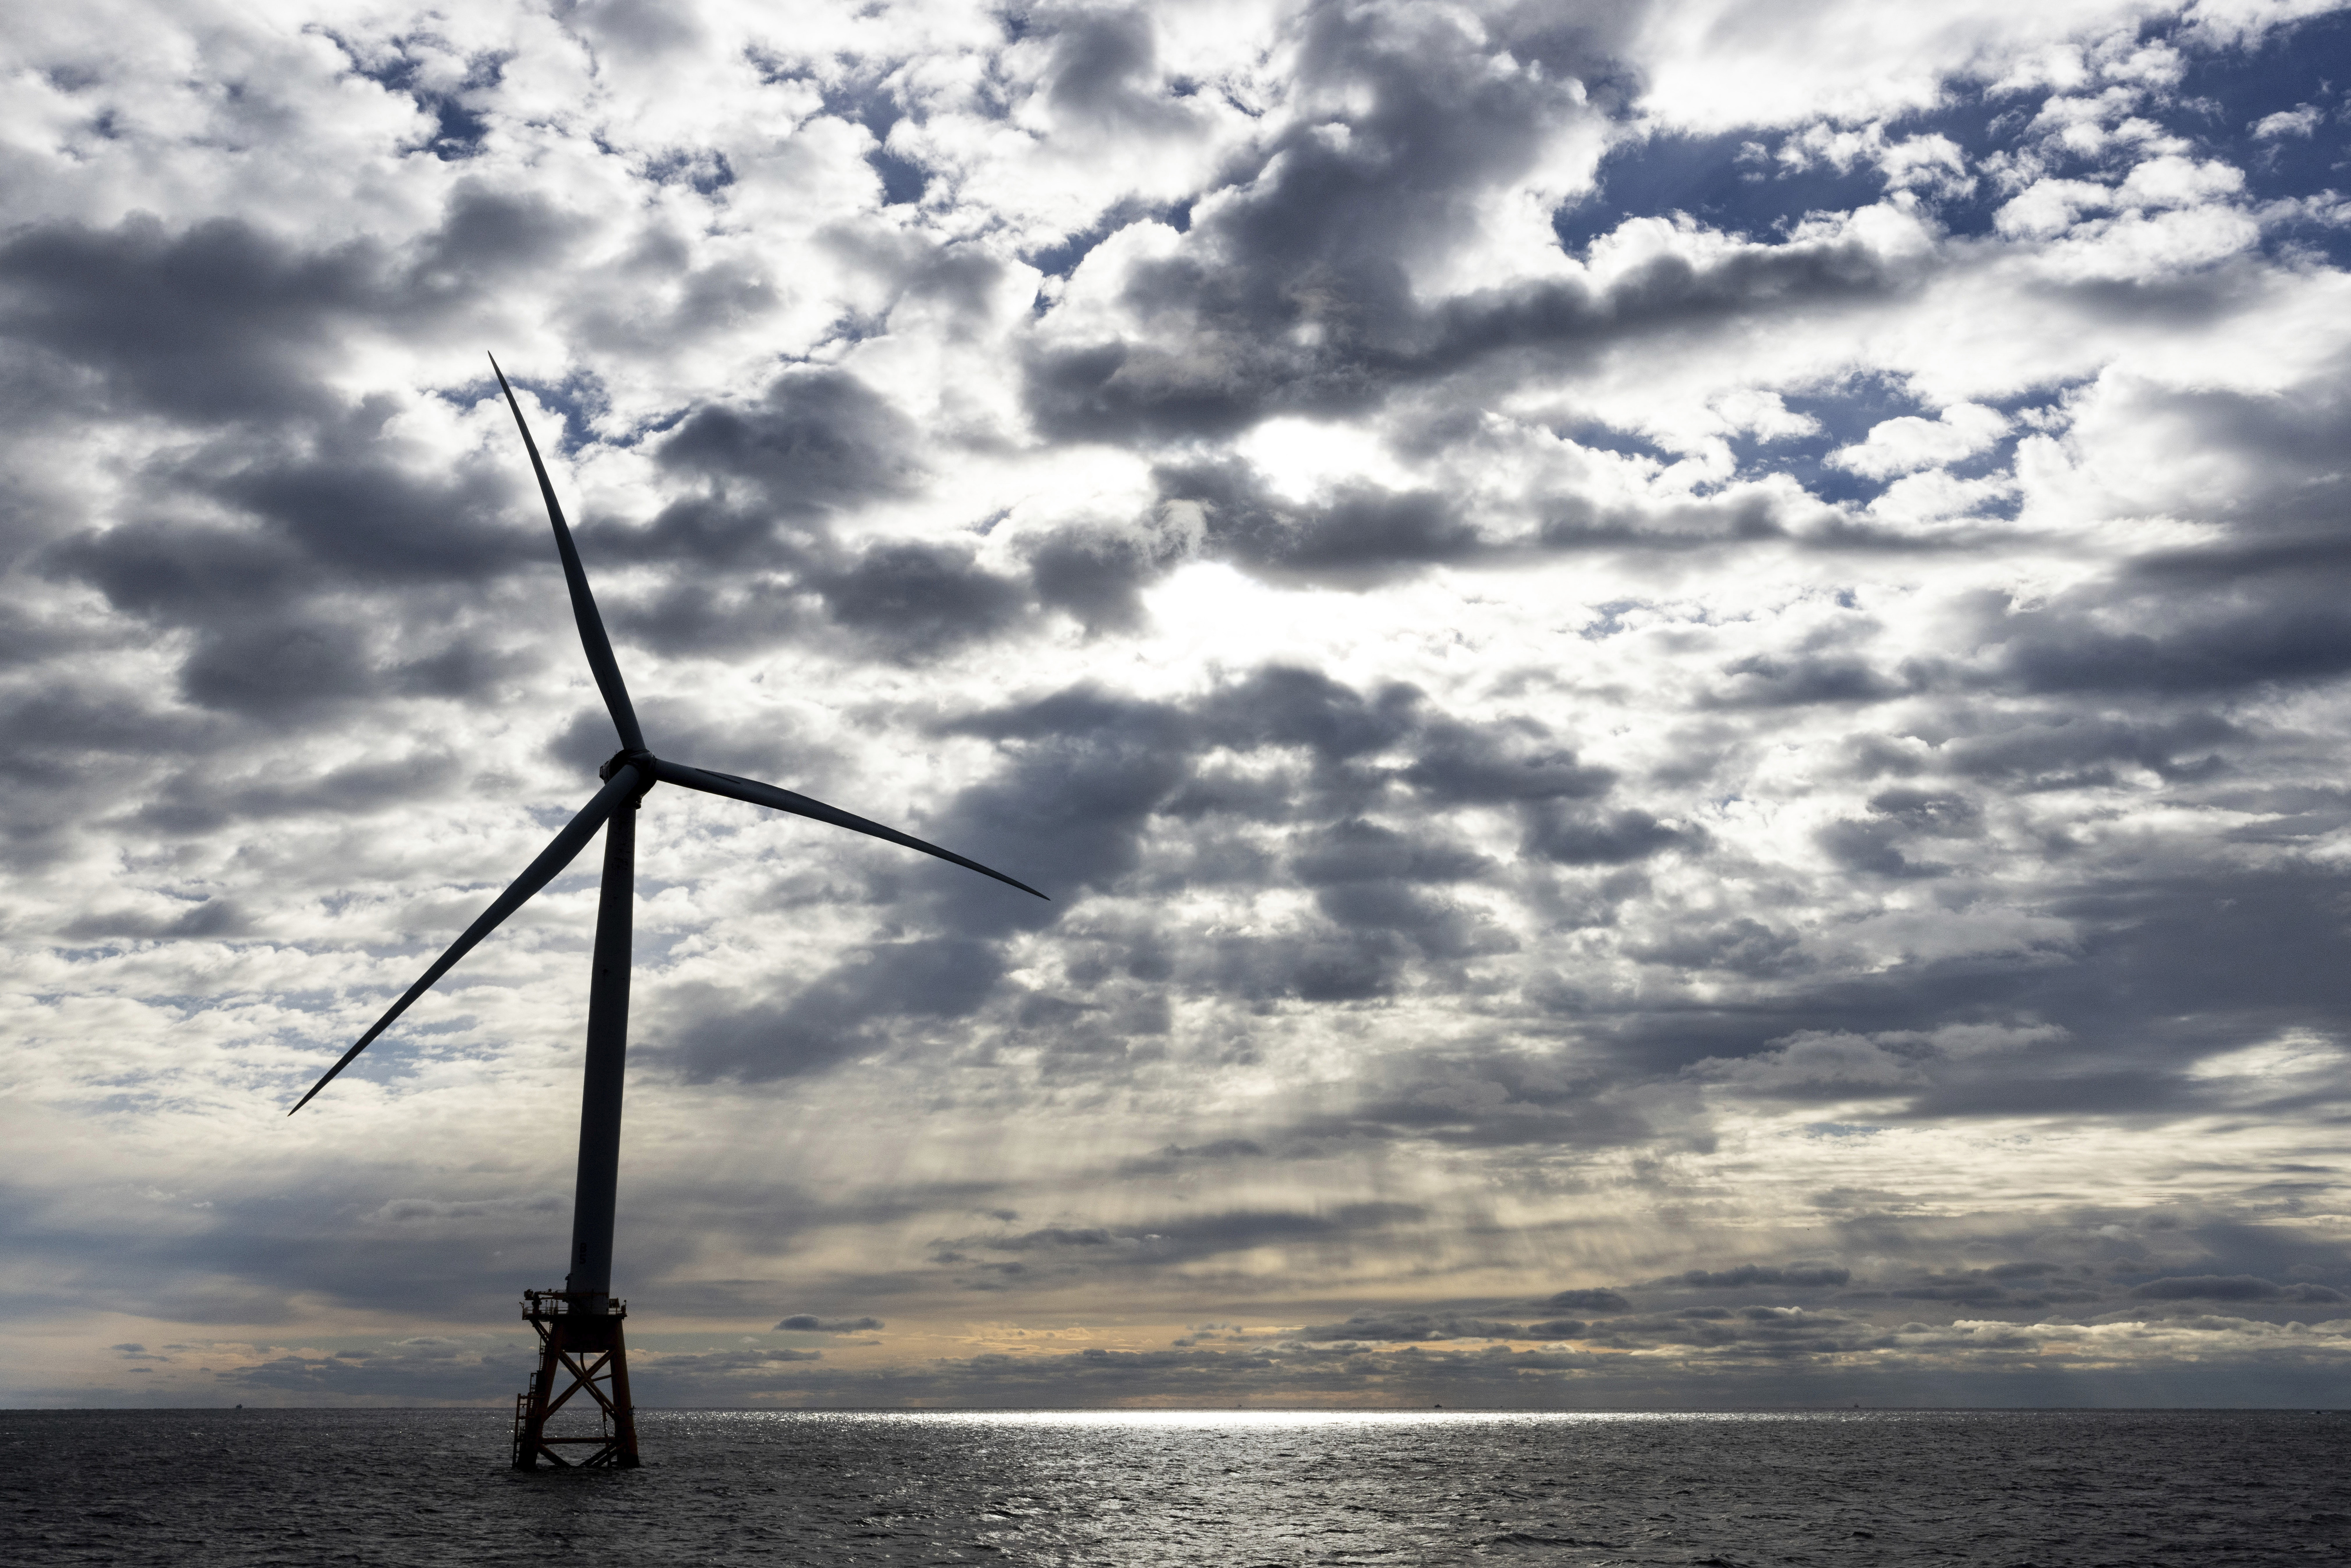 Pacific fishery council calls for new start to offshore wind